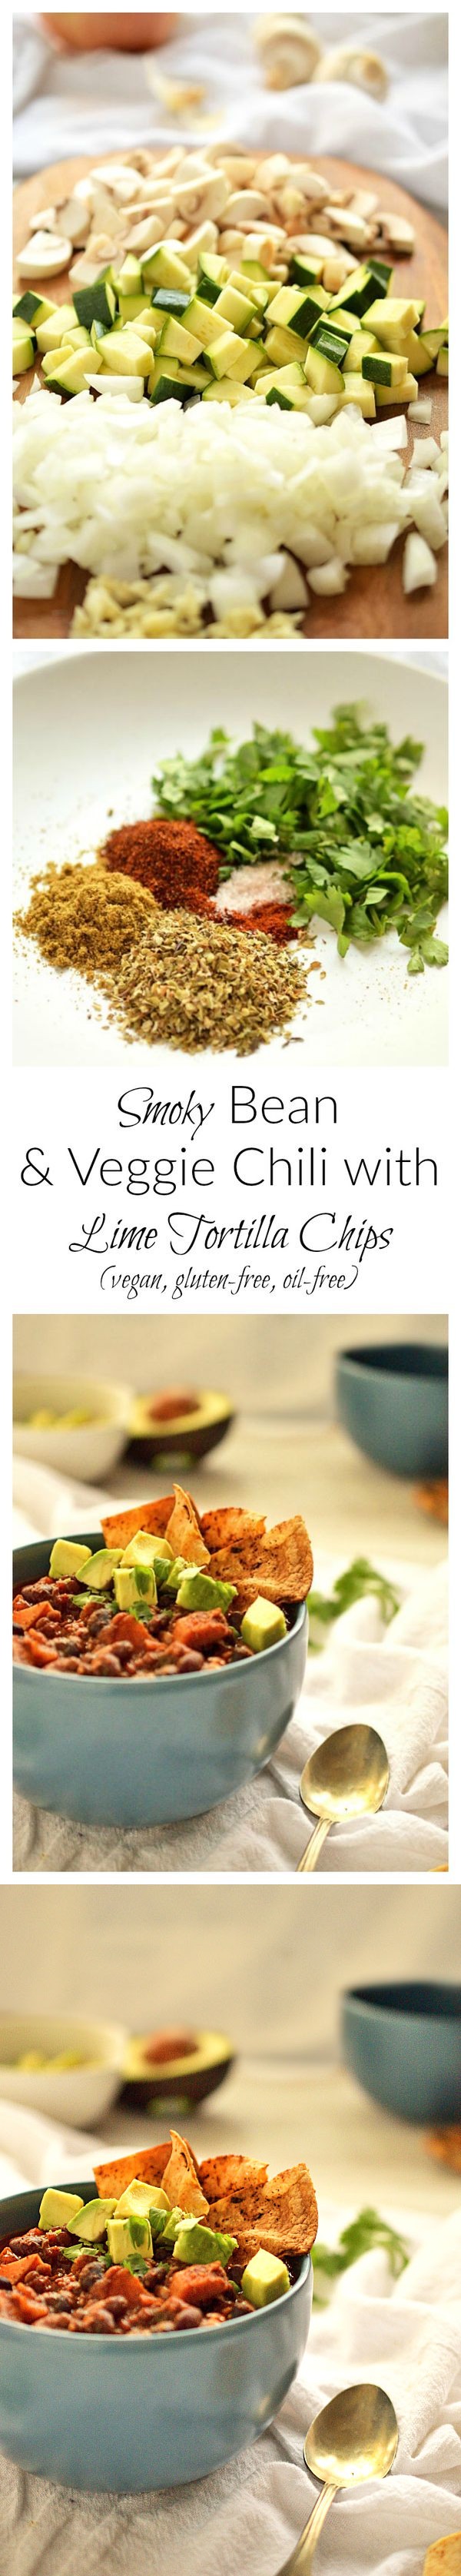 Smoky Bean and Veggie Chili with Lime Tortilla Chips